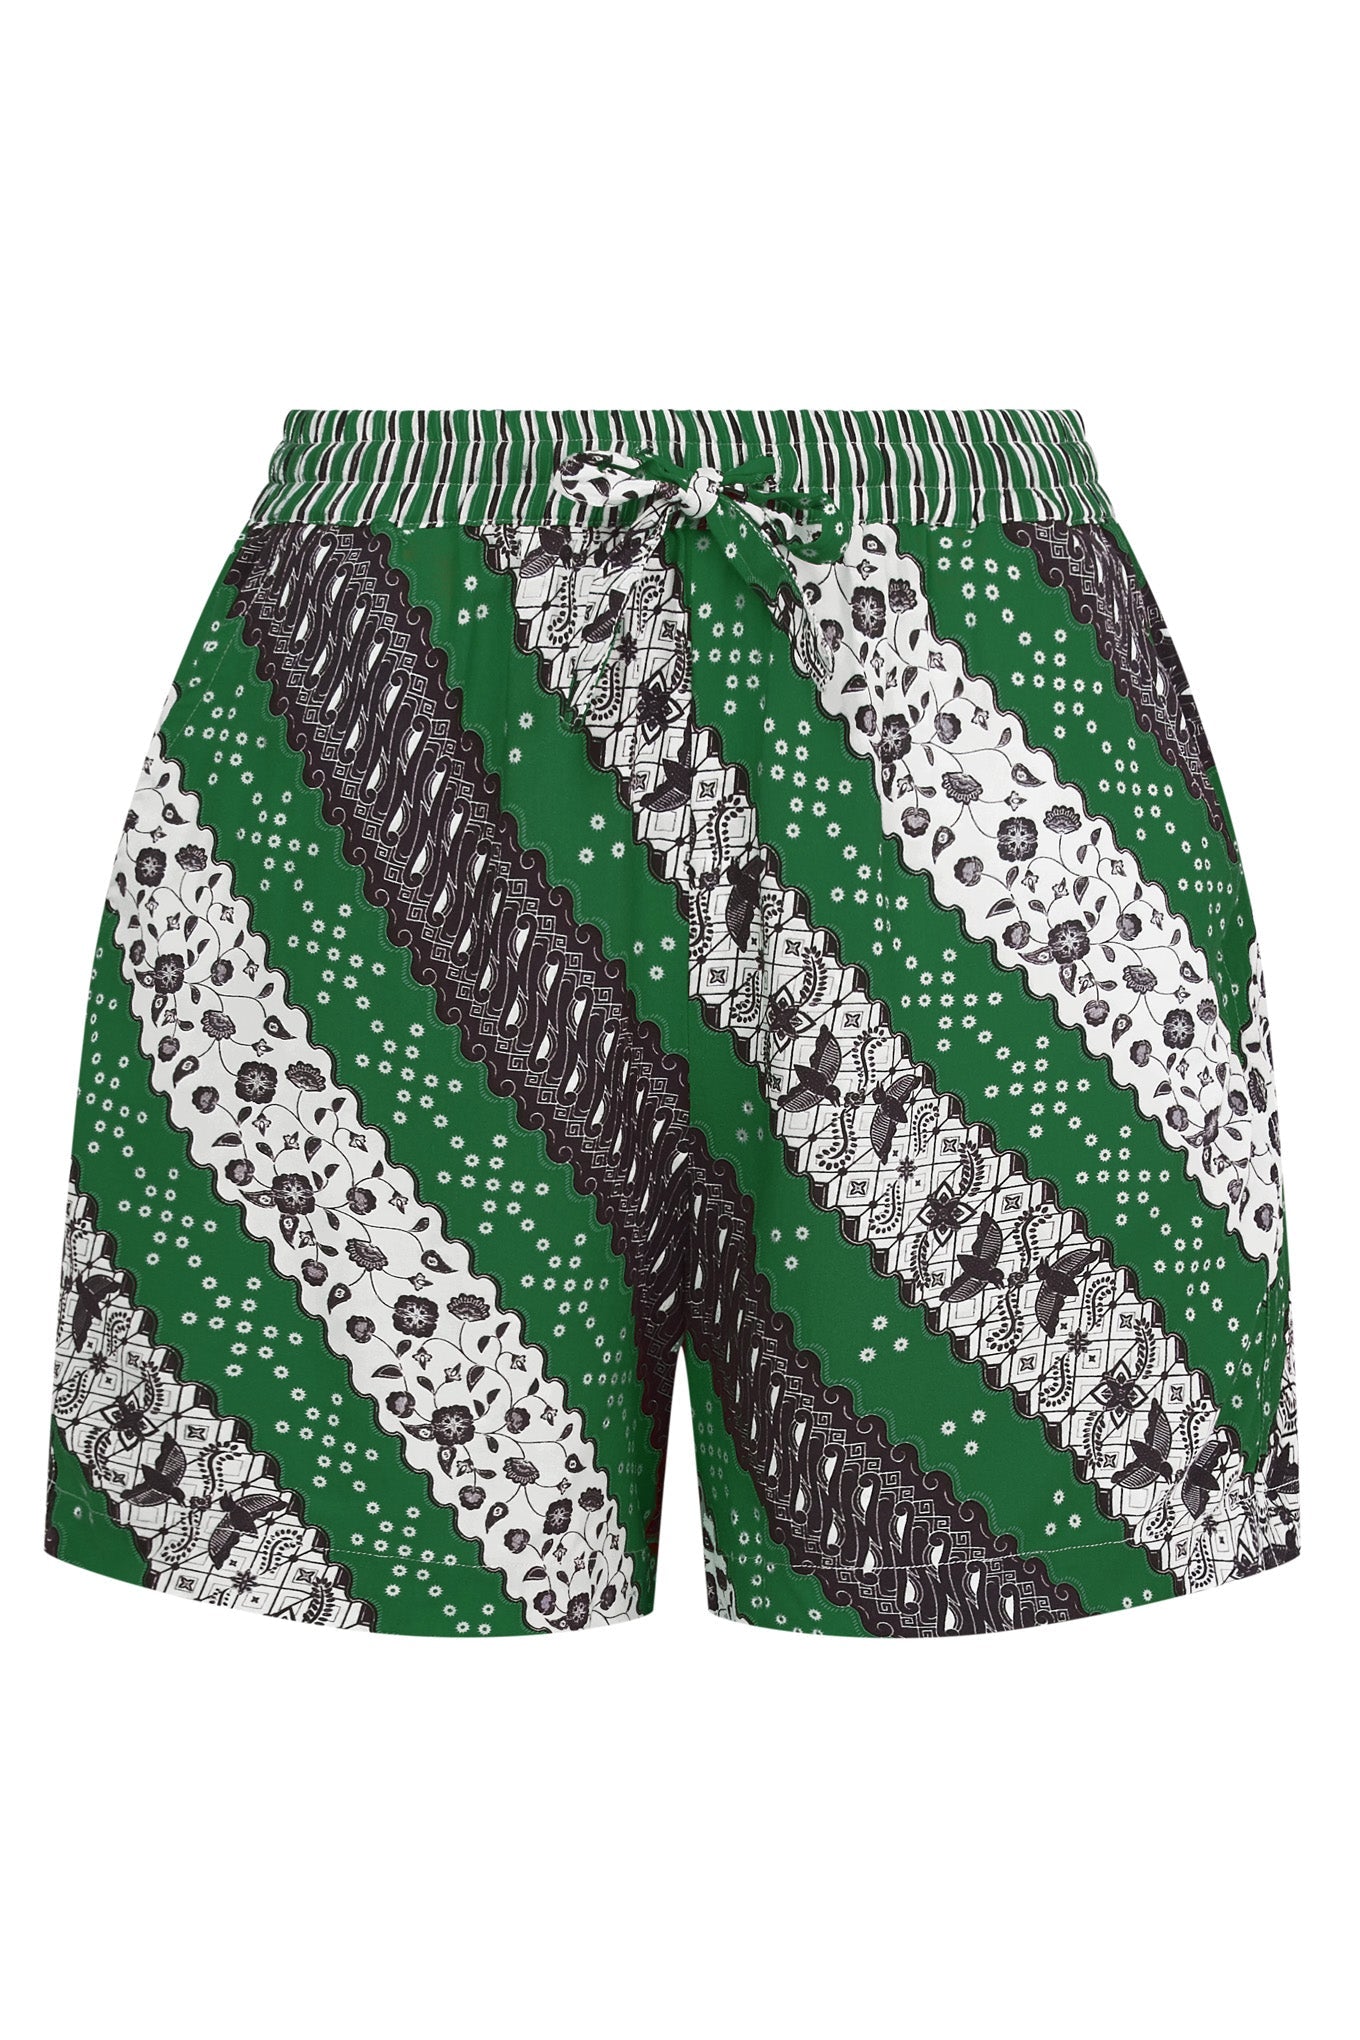 Summer green Leah shorts made from tree cellulose from Komodo